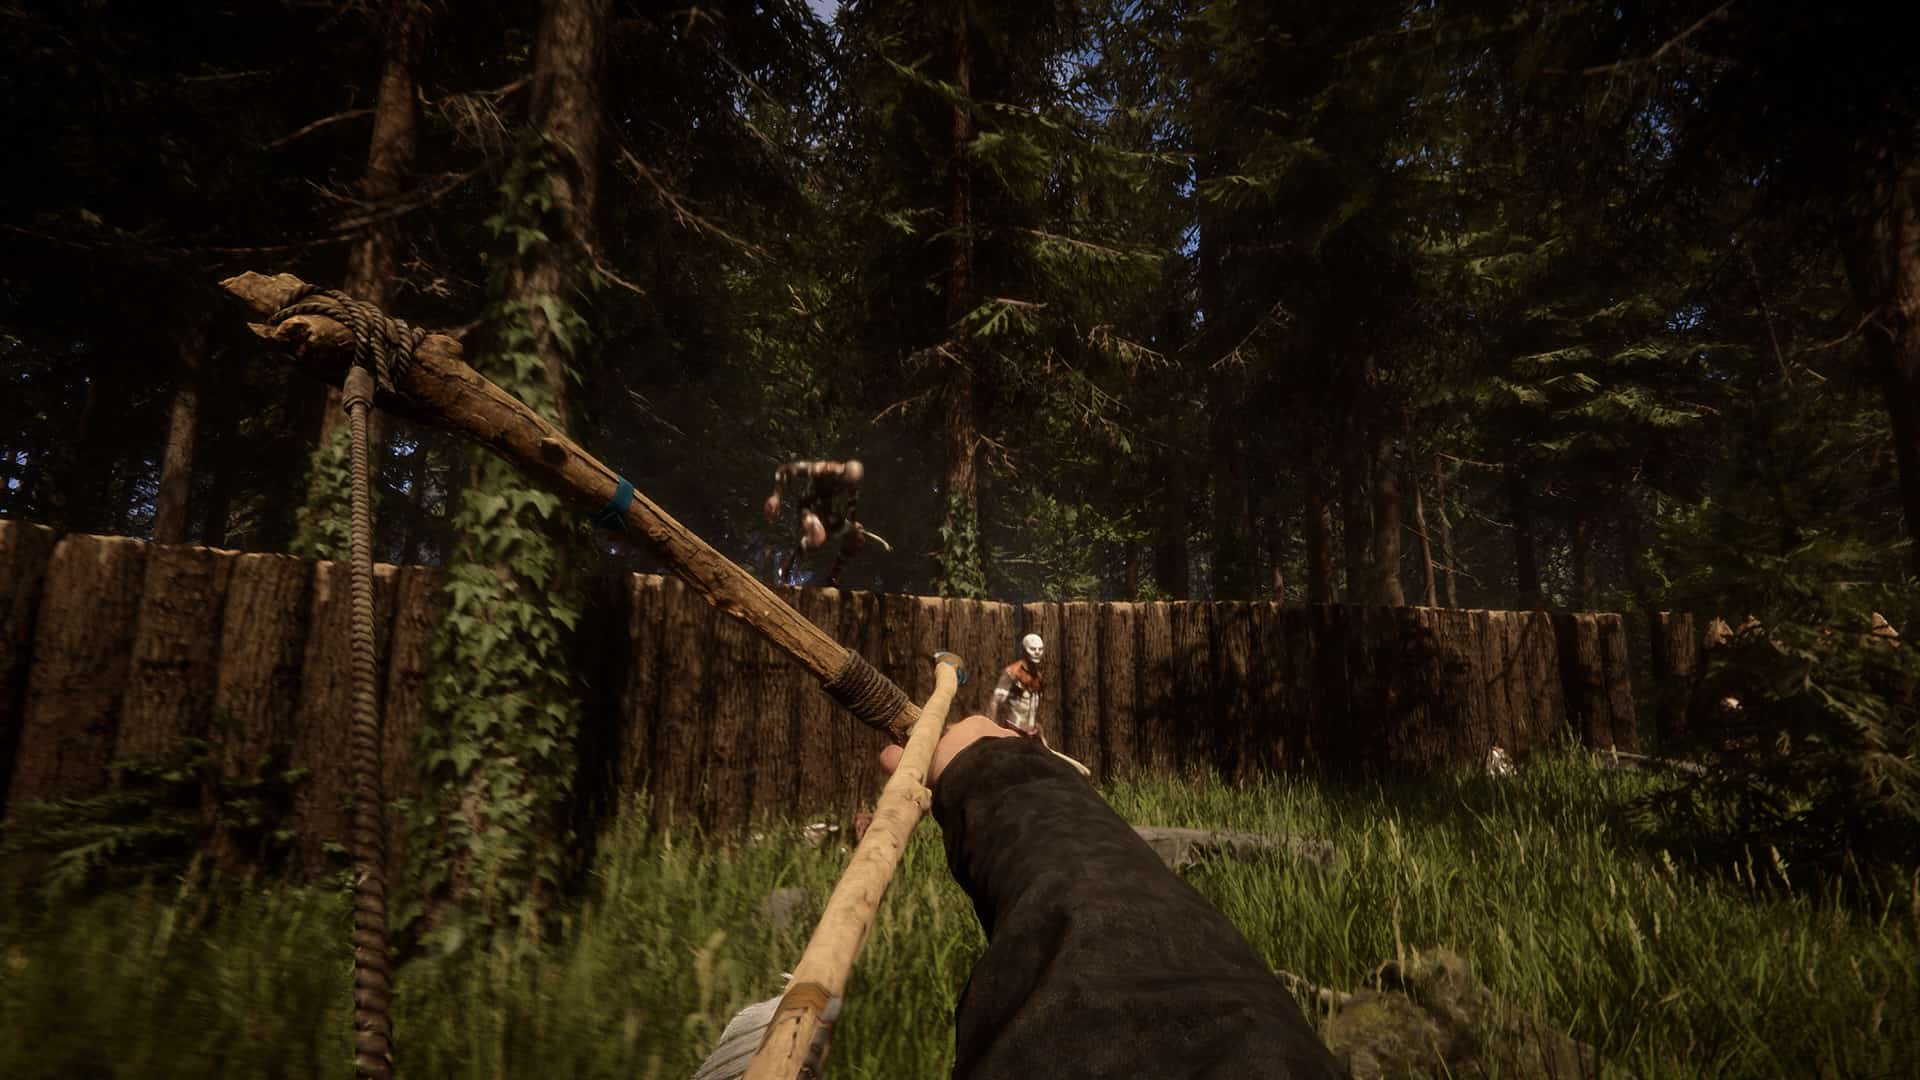 Is The Forest Coming to Xbox One?